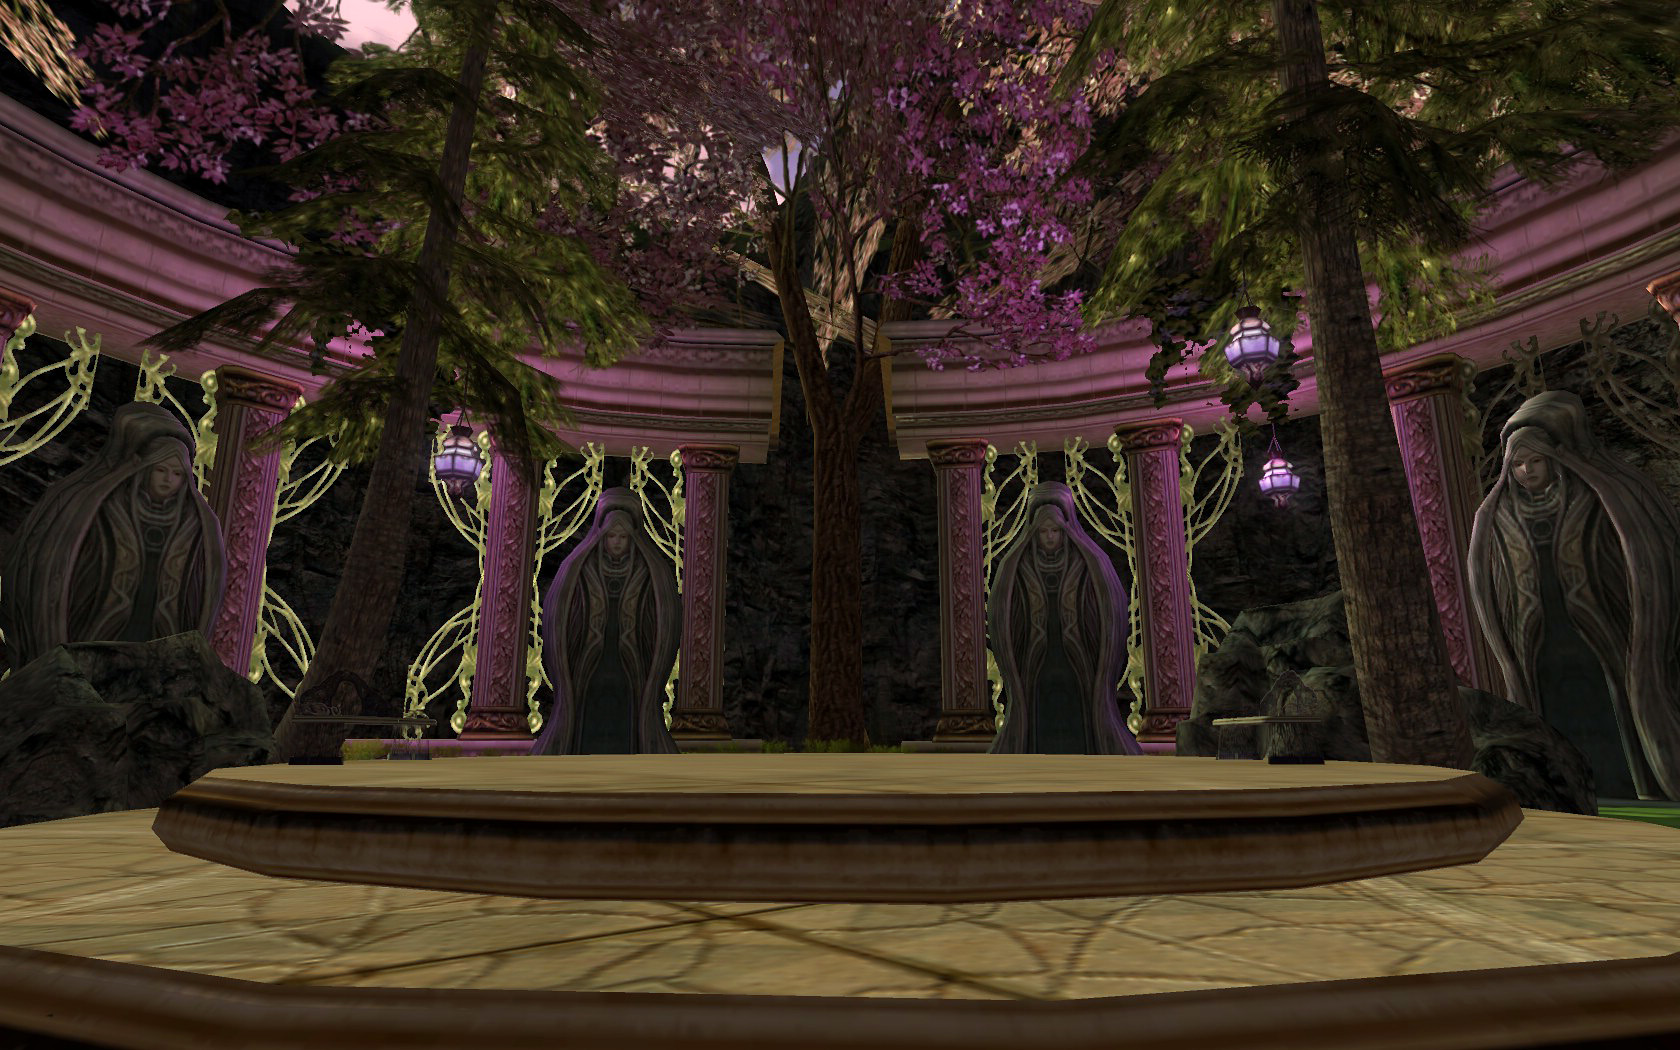 a stage in the middle of a park area with large pillars, and trees